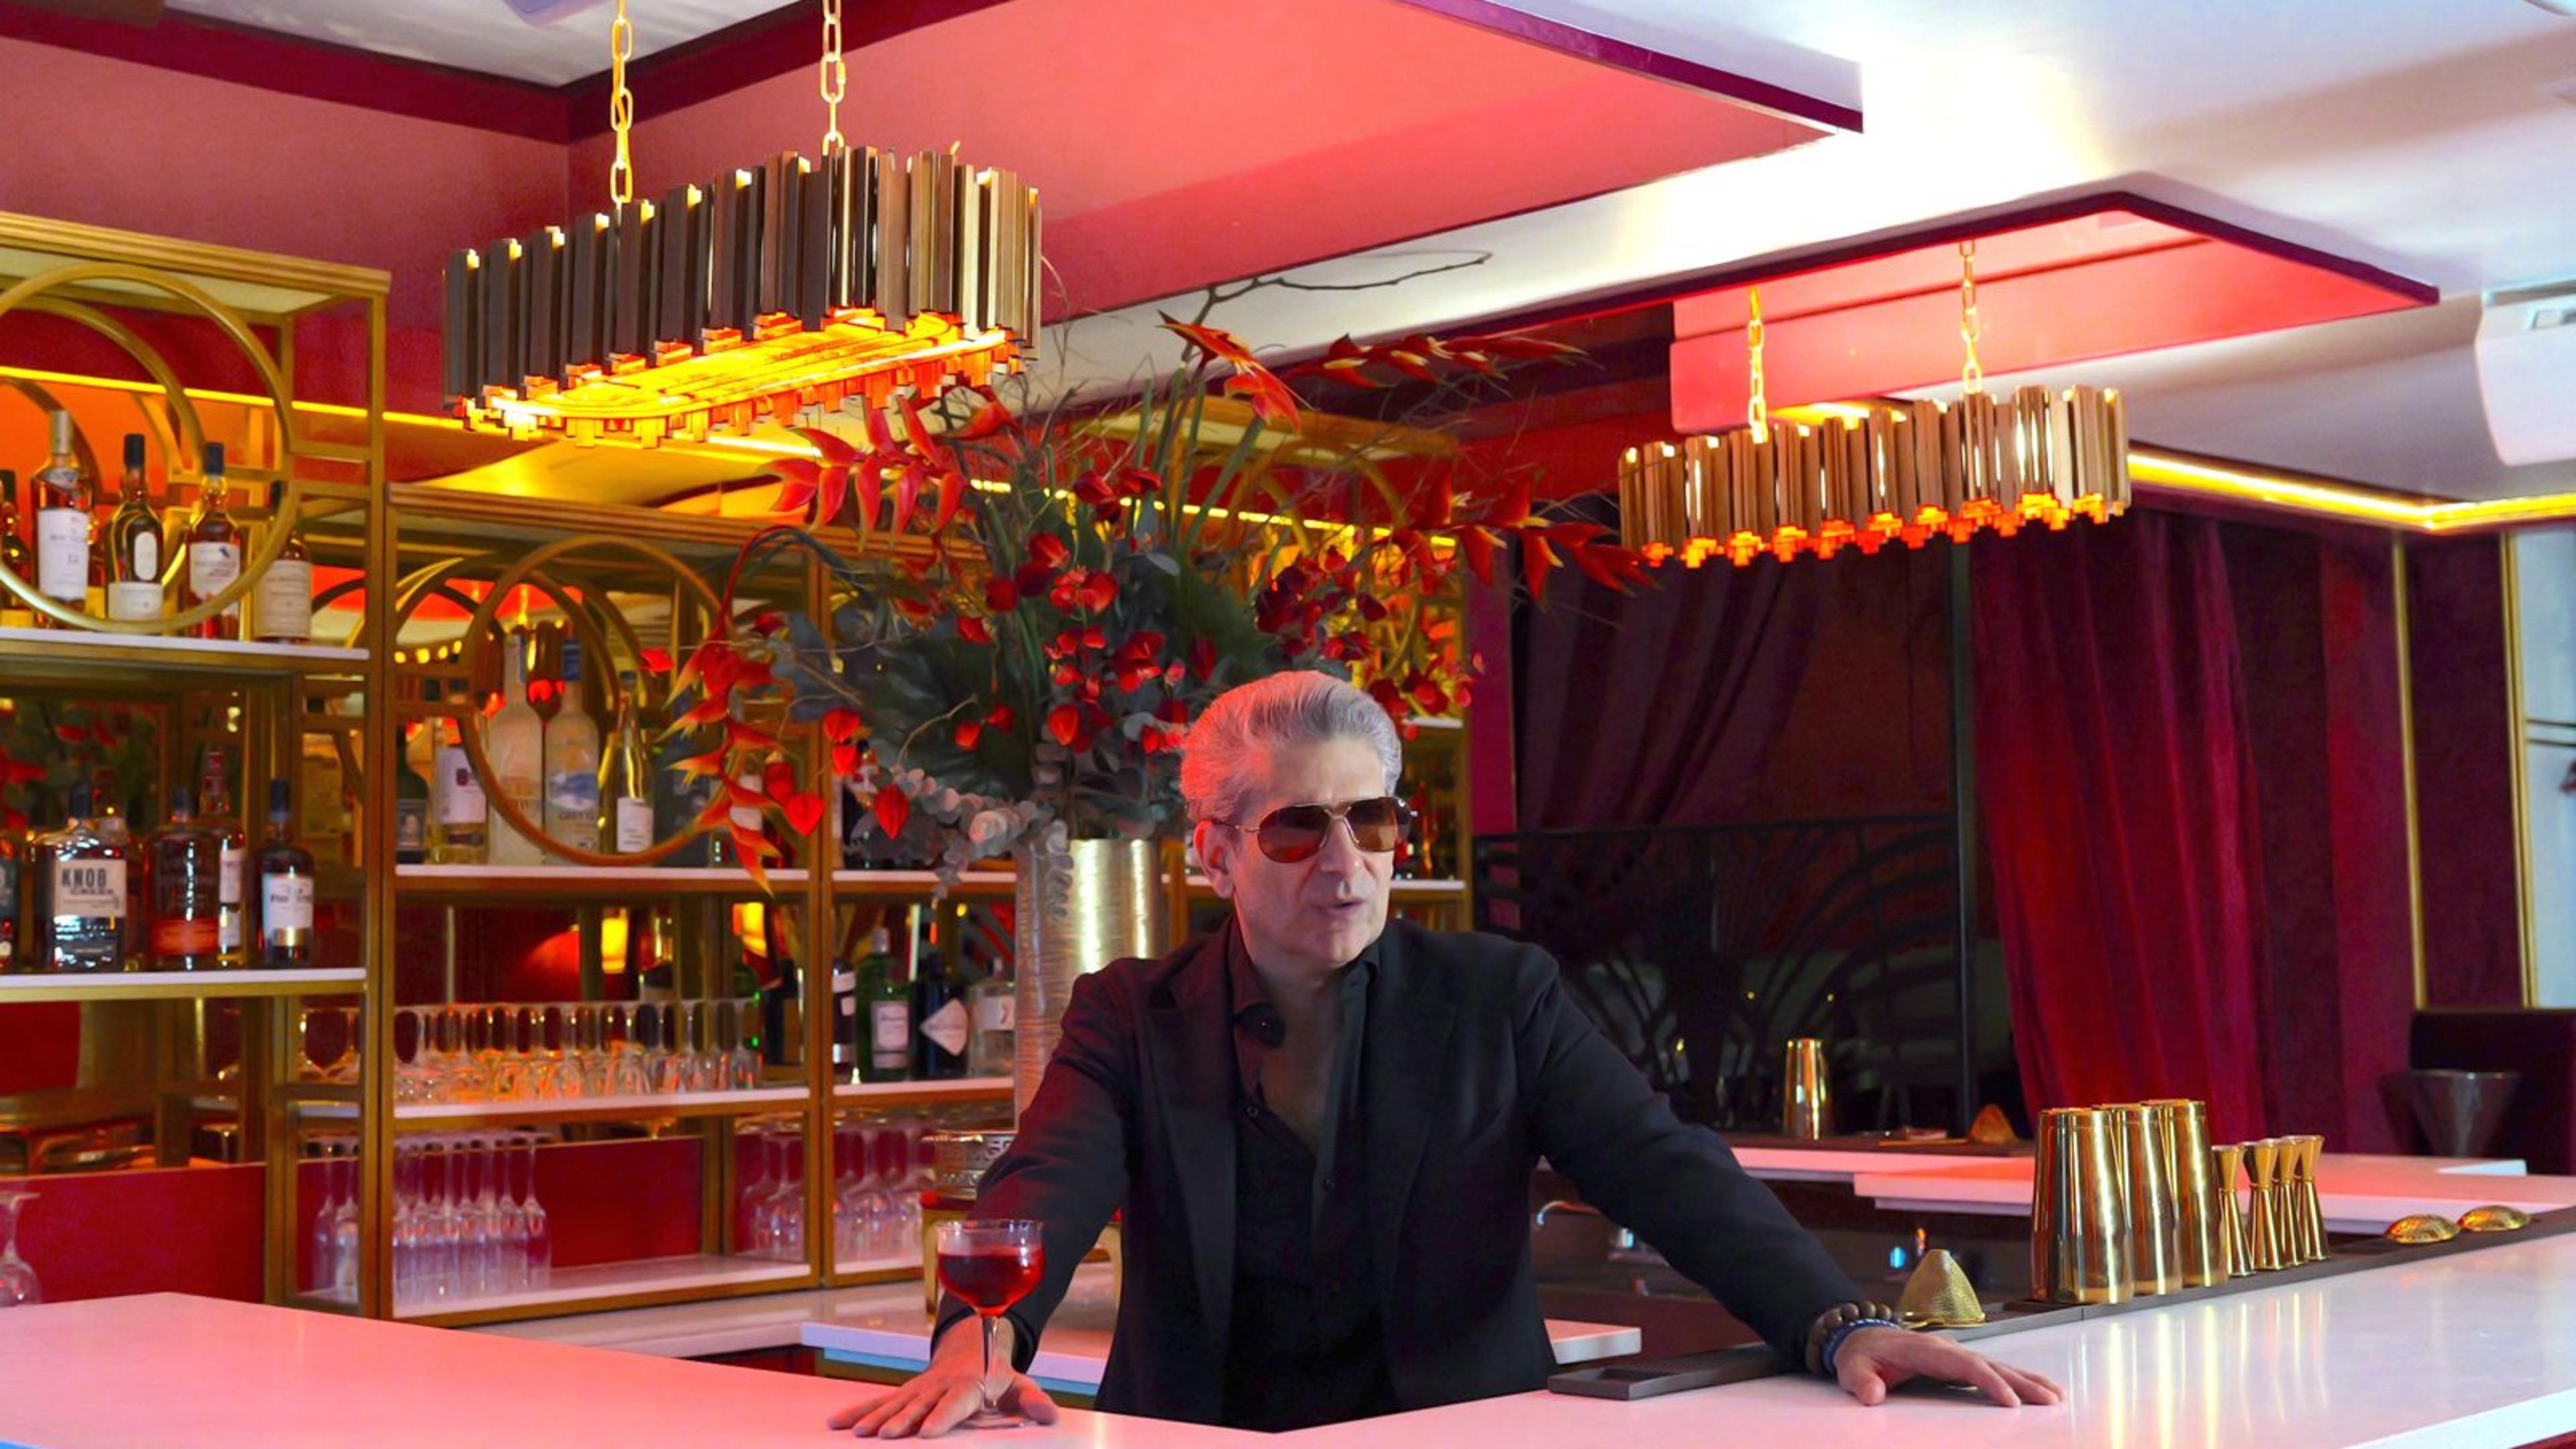 the actor michael imperioli wears sunglasses and a black jacket and stands behind a bar decked out with gold tumblers and accents